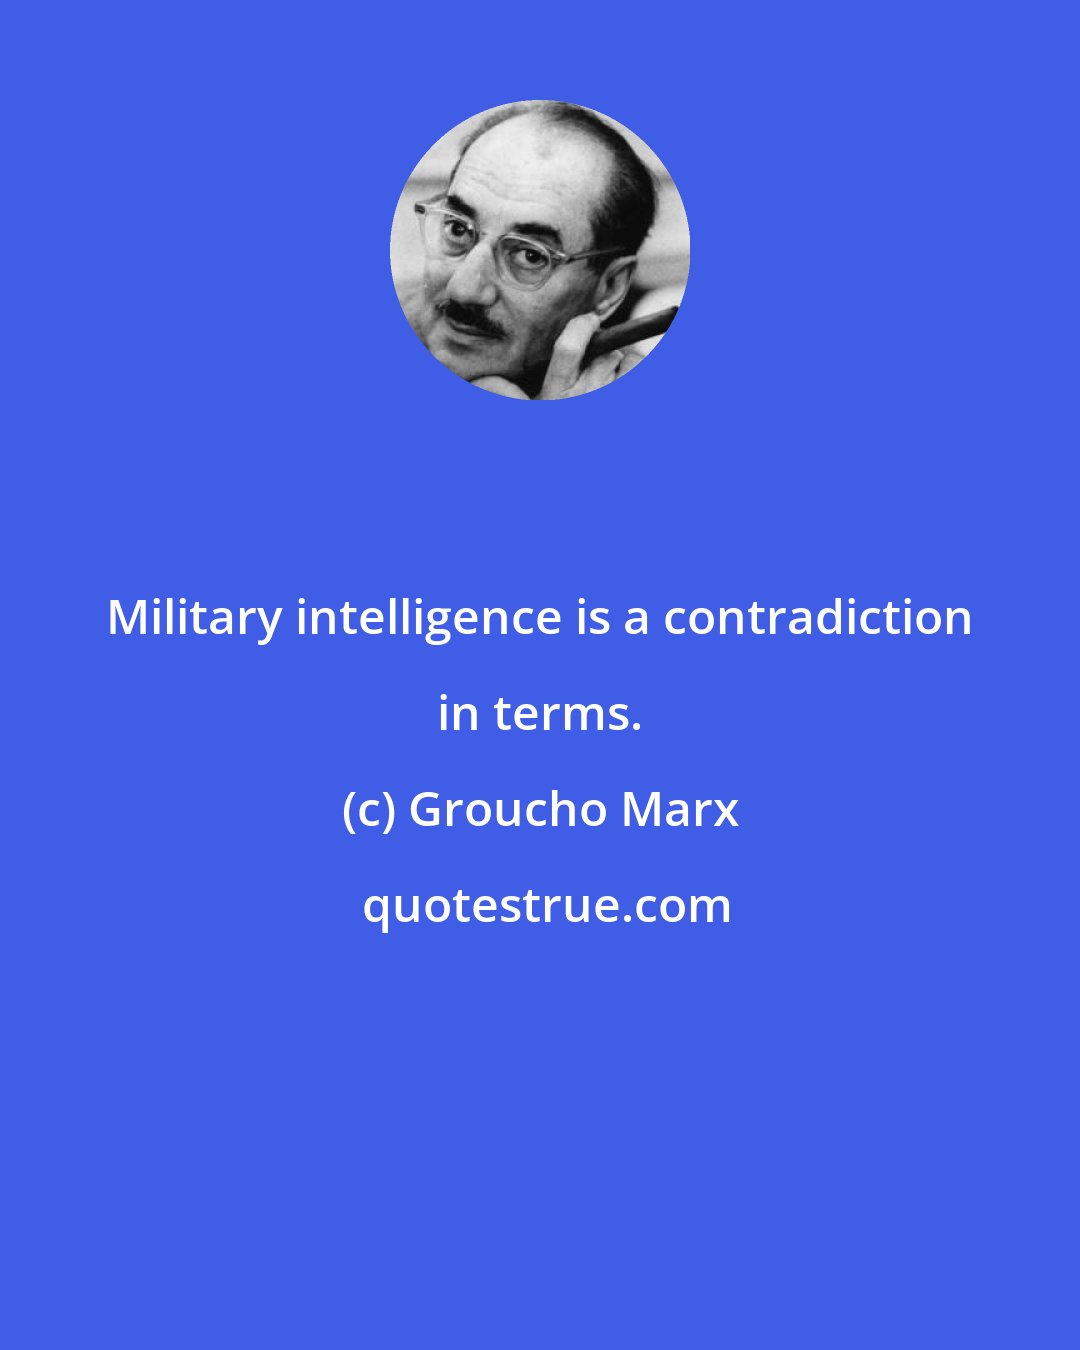 Groucho Marx: Military intelligence is a contradiction in terms.